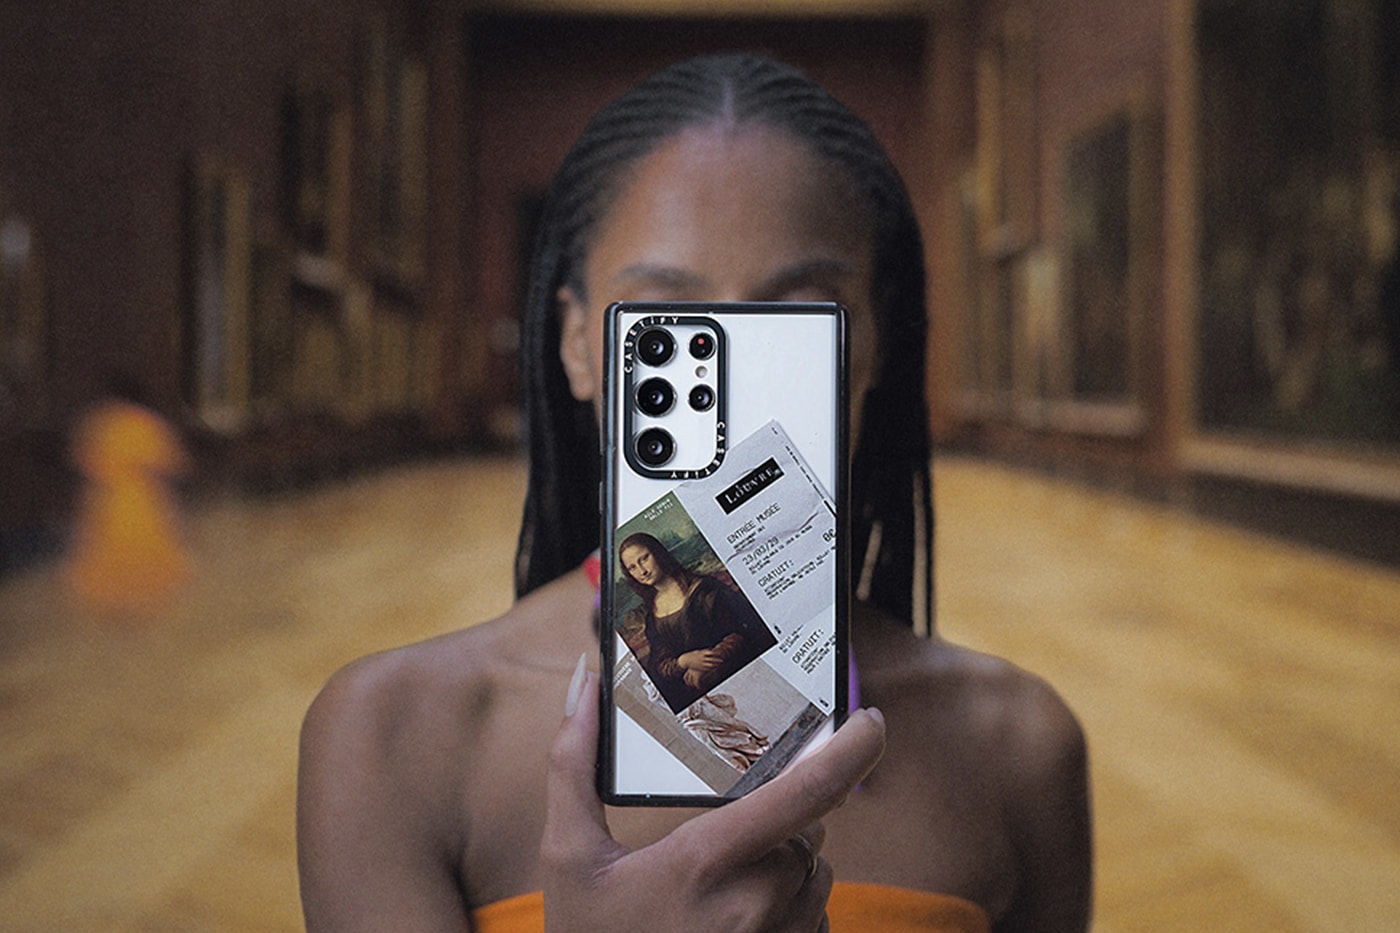 Louvre Museum CASETiFY Second Collab Release Info